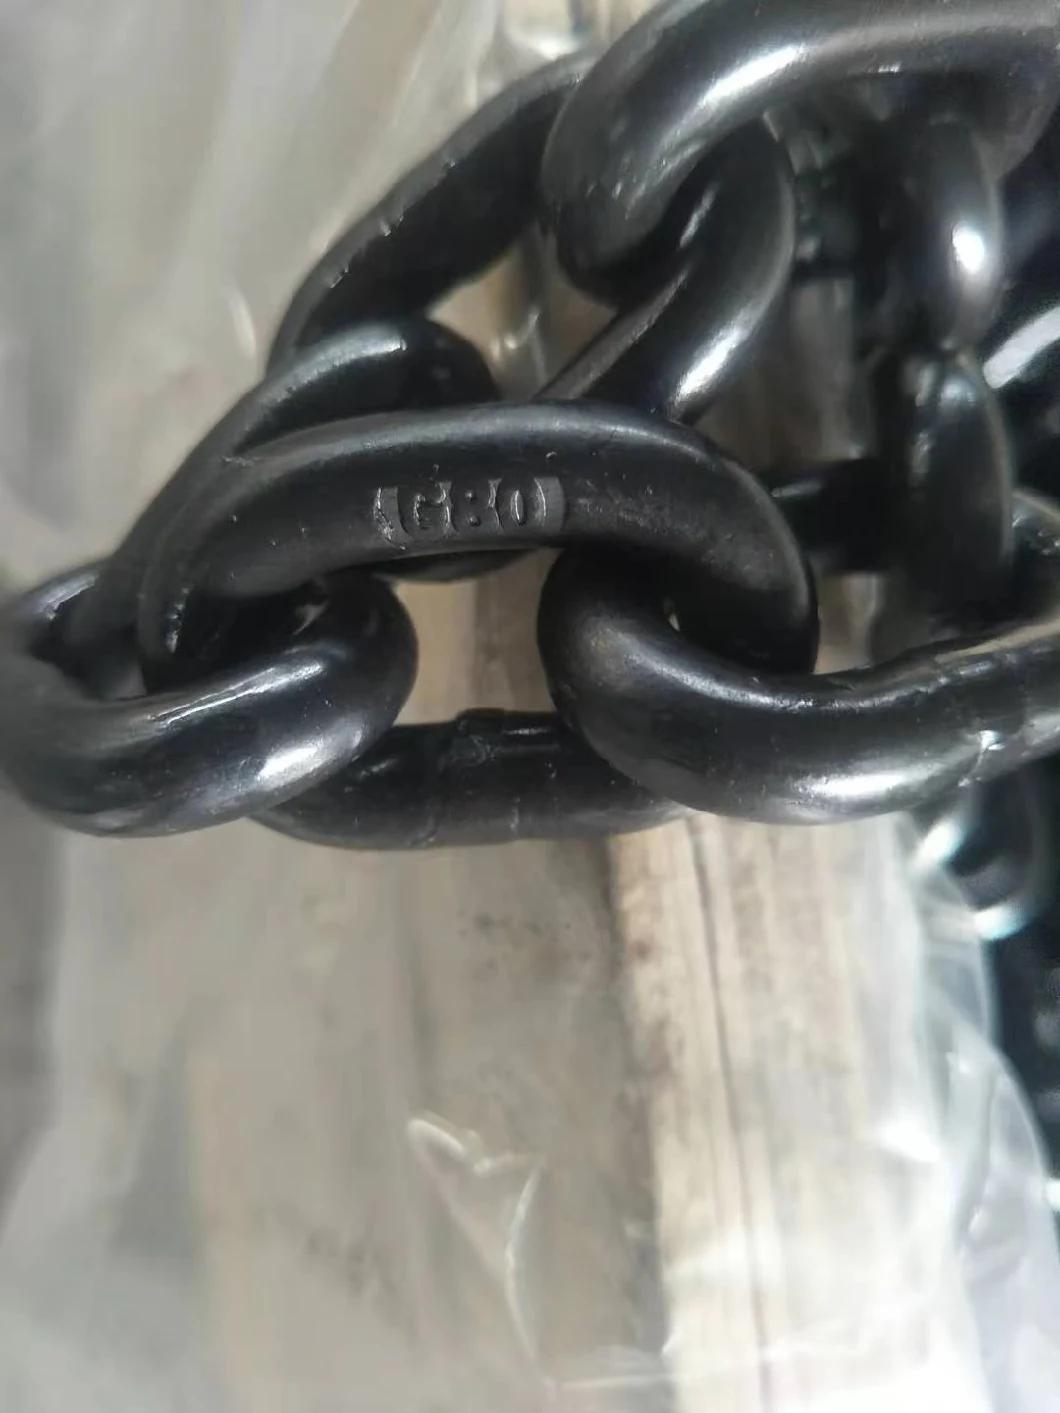 Best Selling 16mm G80 Alloy Steel Chain for Mining